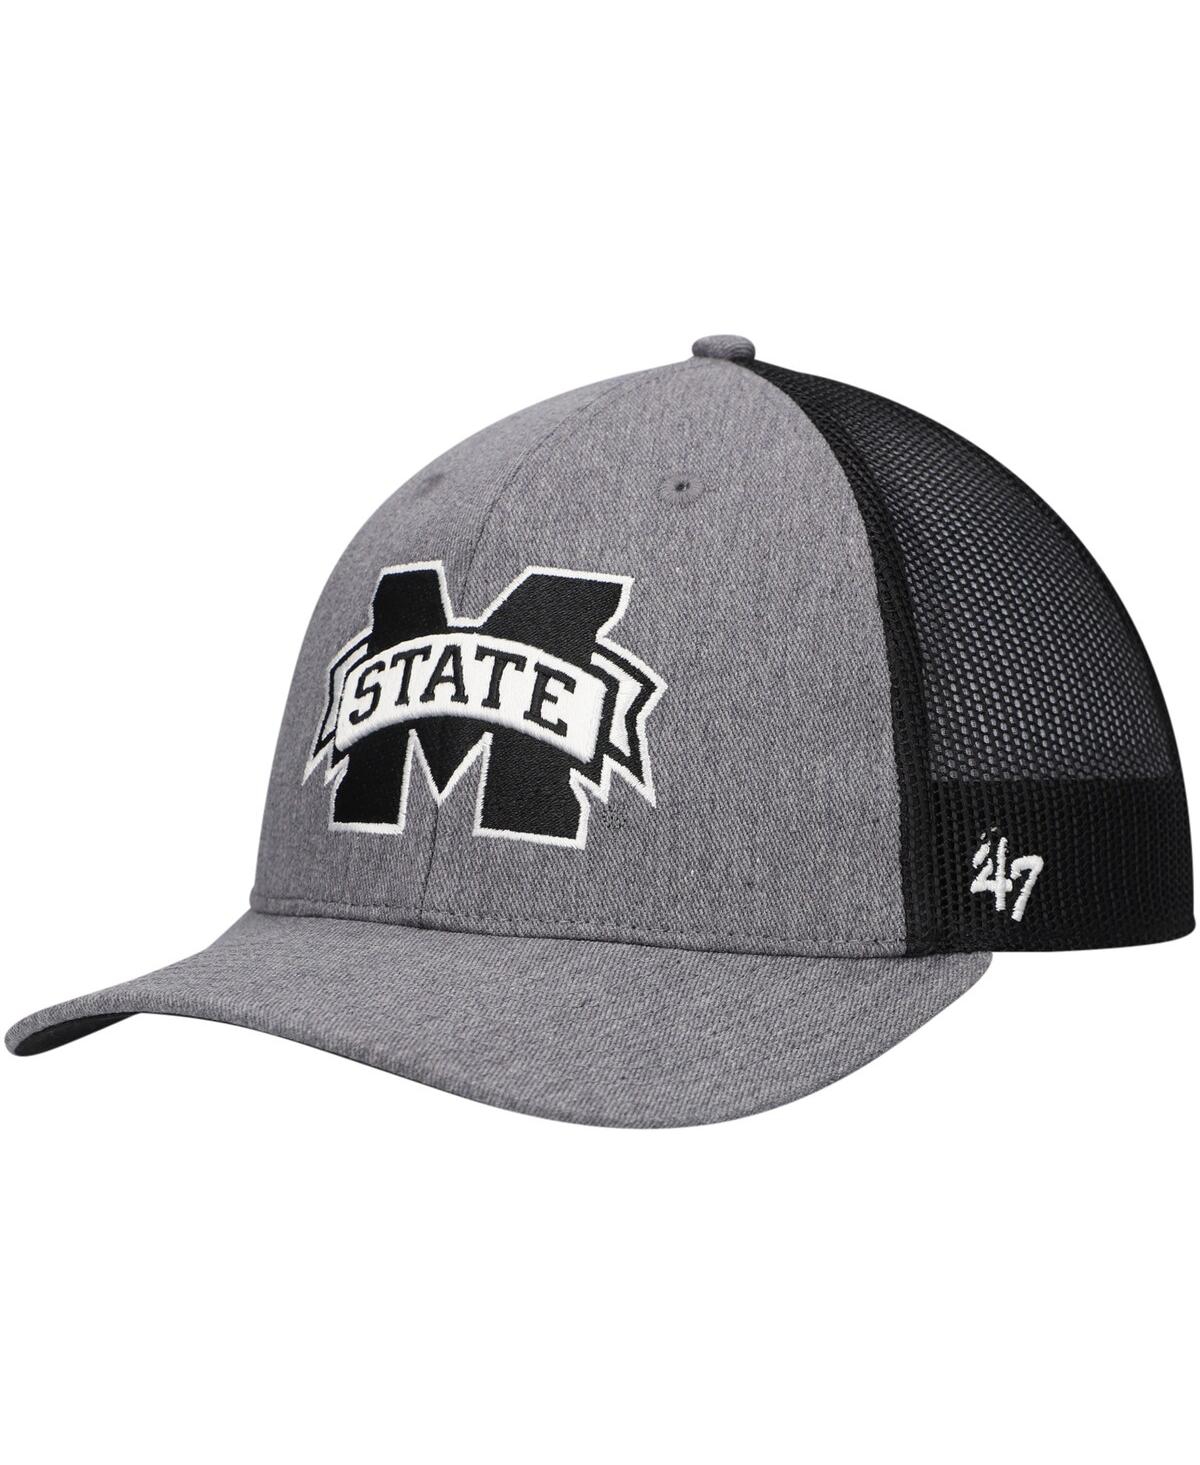 47 Brand Men's Charcoal Mississippi State Bulldogs Carbon Trucker Adjustable Hat - Charcoal